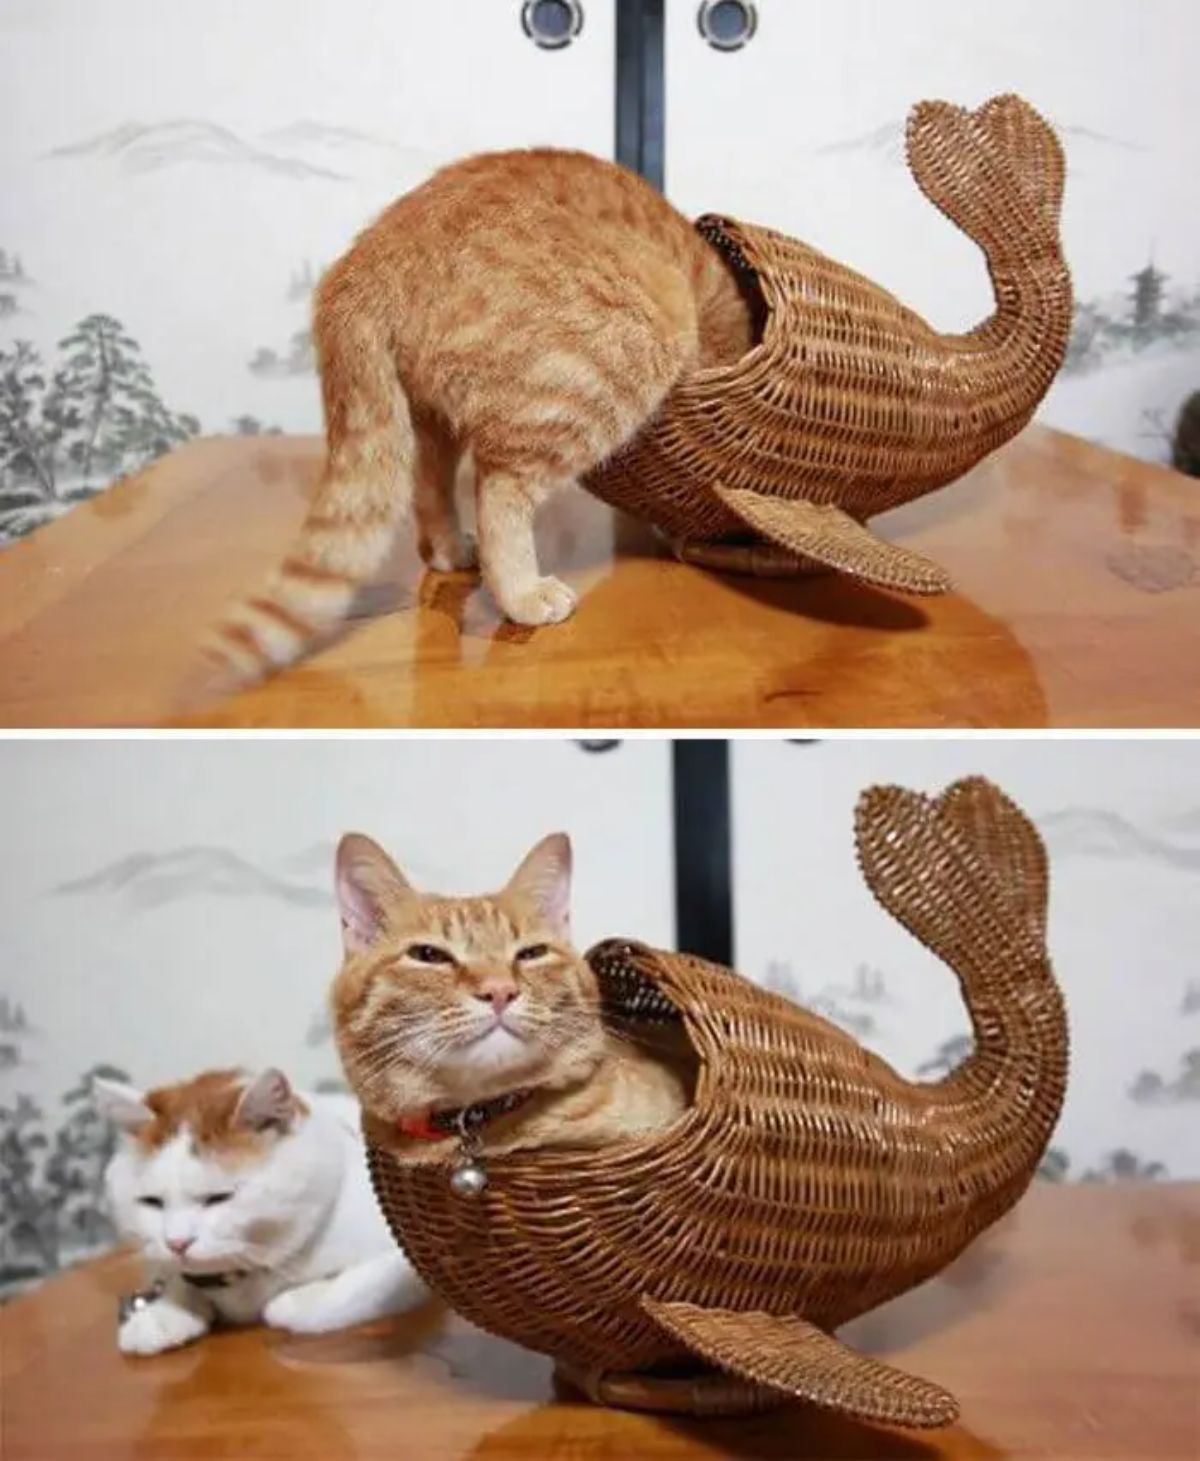 2 photos of an orange cat with the head inside a wicker mermaid tail and sitting inside the tail in the second photo with an orange and white cat next to him on the table